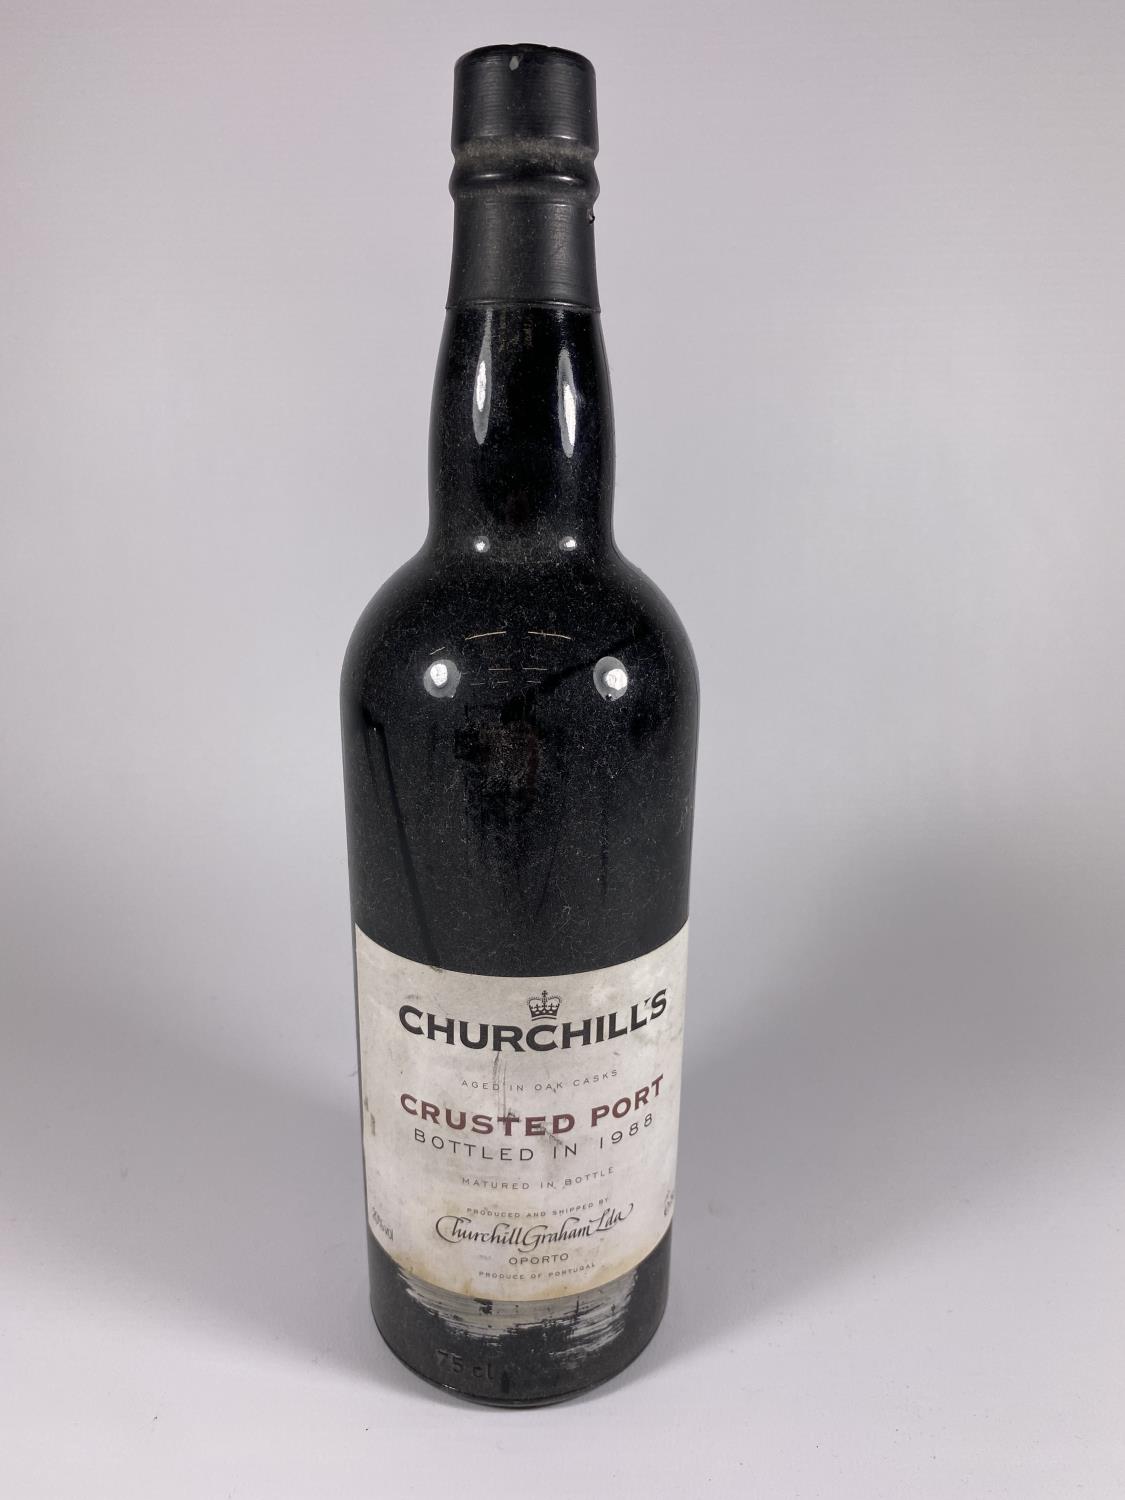 1 X 75CL BOTTLE - CHURCHILL'S CRUSTED 1988 VINTAGE PORT